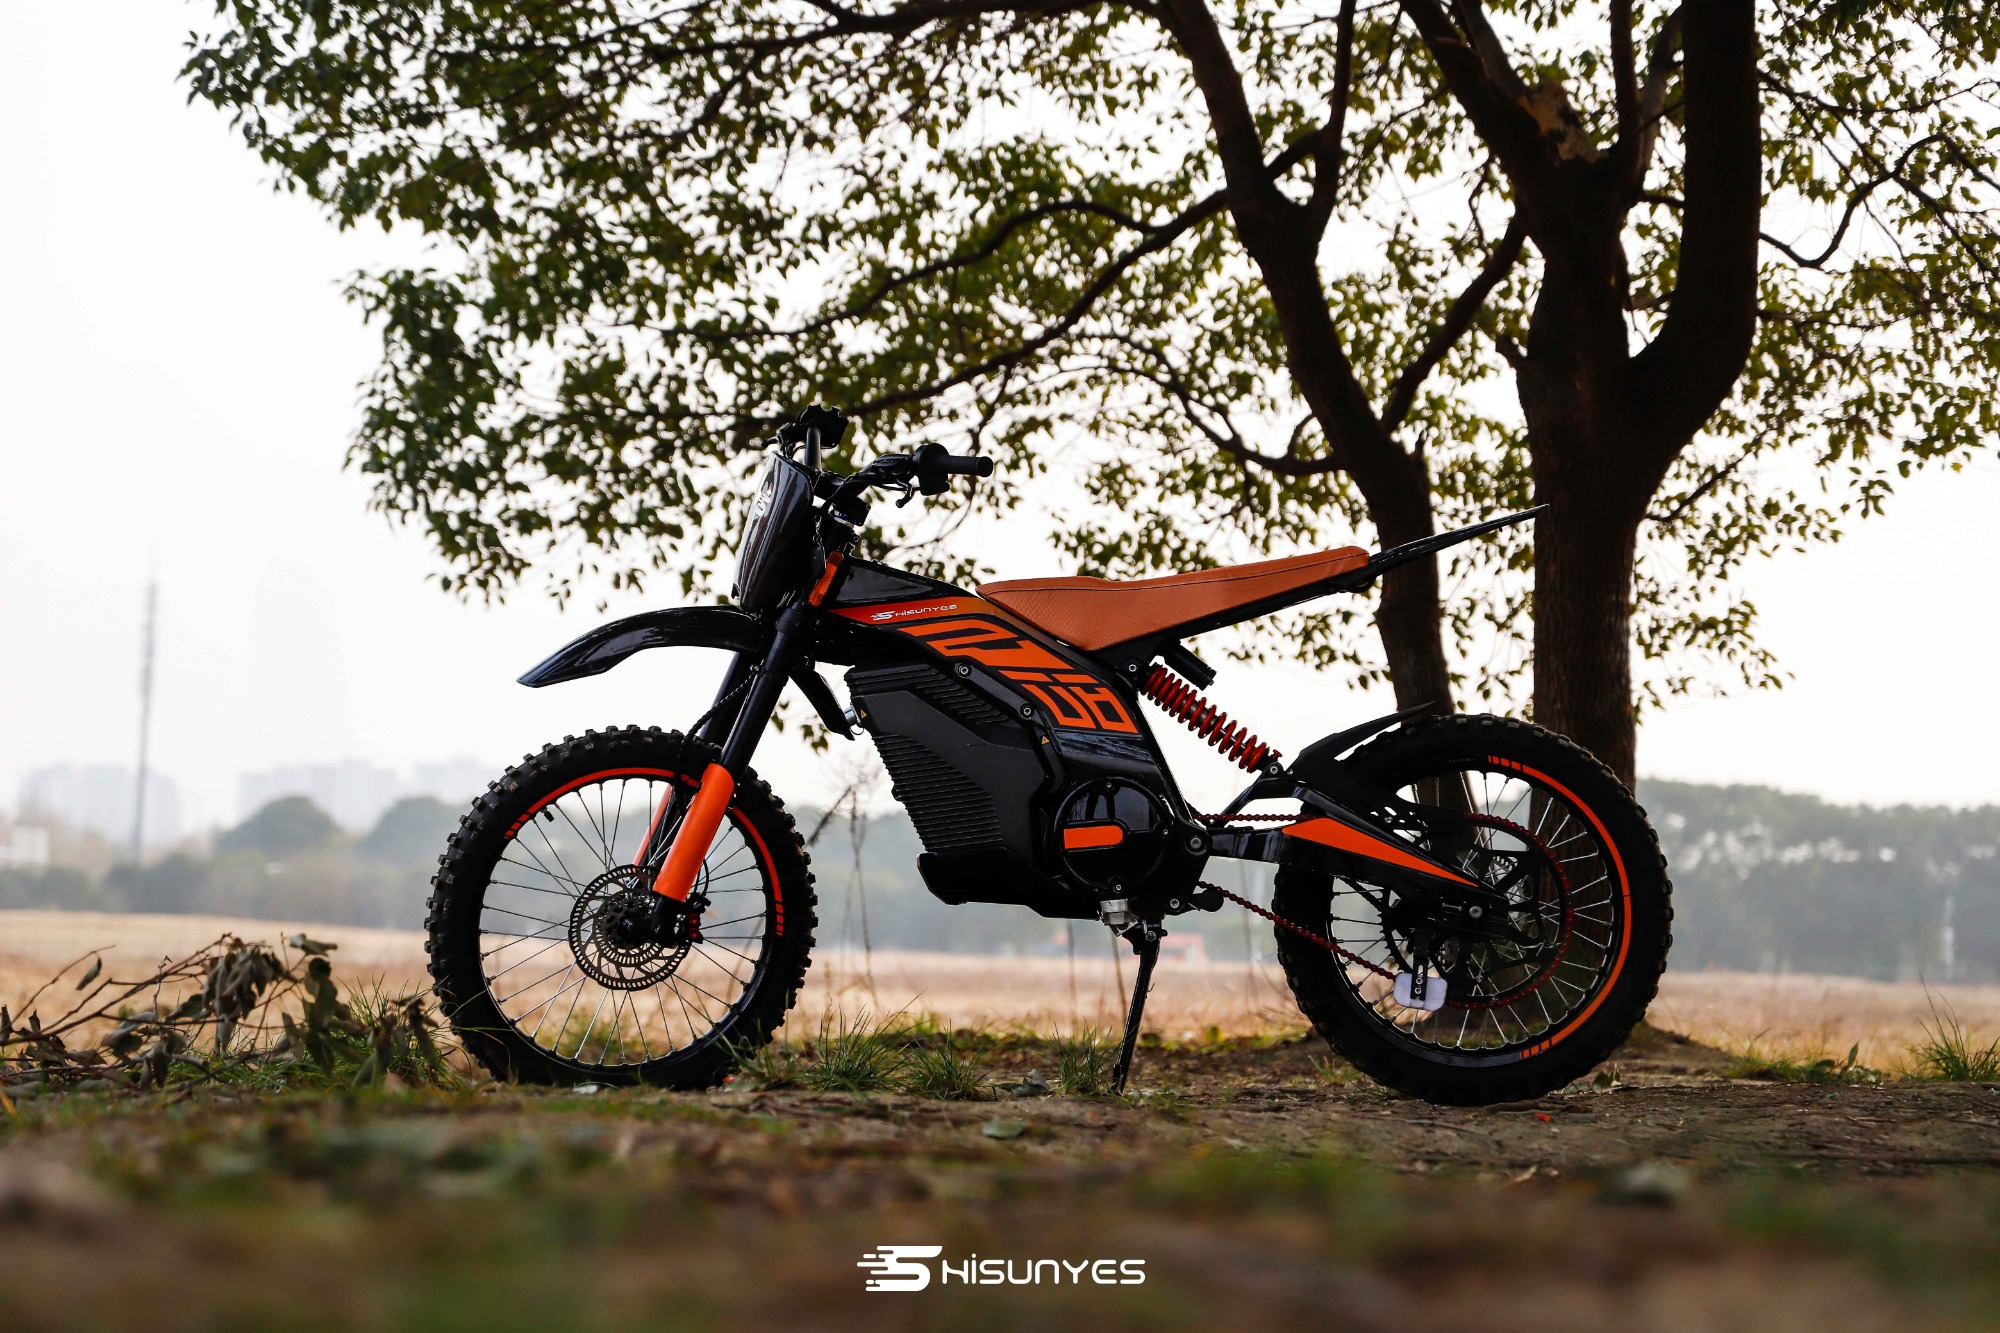 New design of The electric motorcycle S80 Off-road